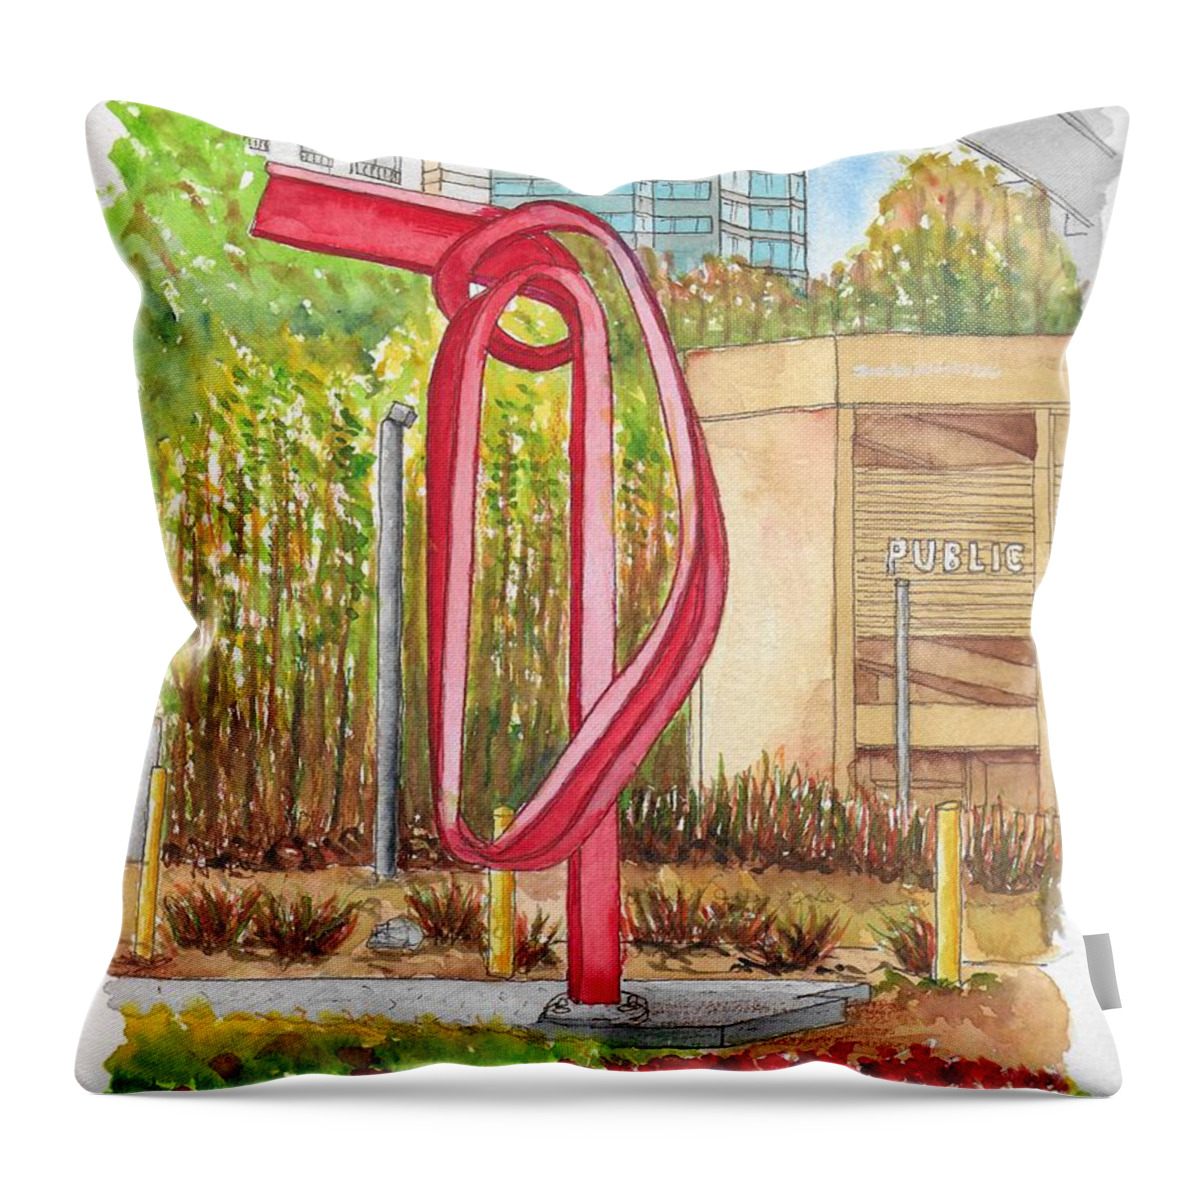 Godot Throw Pillow featuring the painting Godot, sculpture by Bret Price in Century City, California by Carlos G Groppa